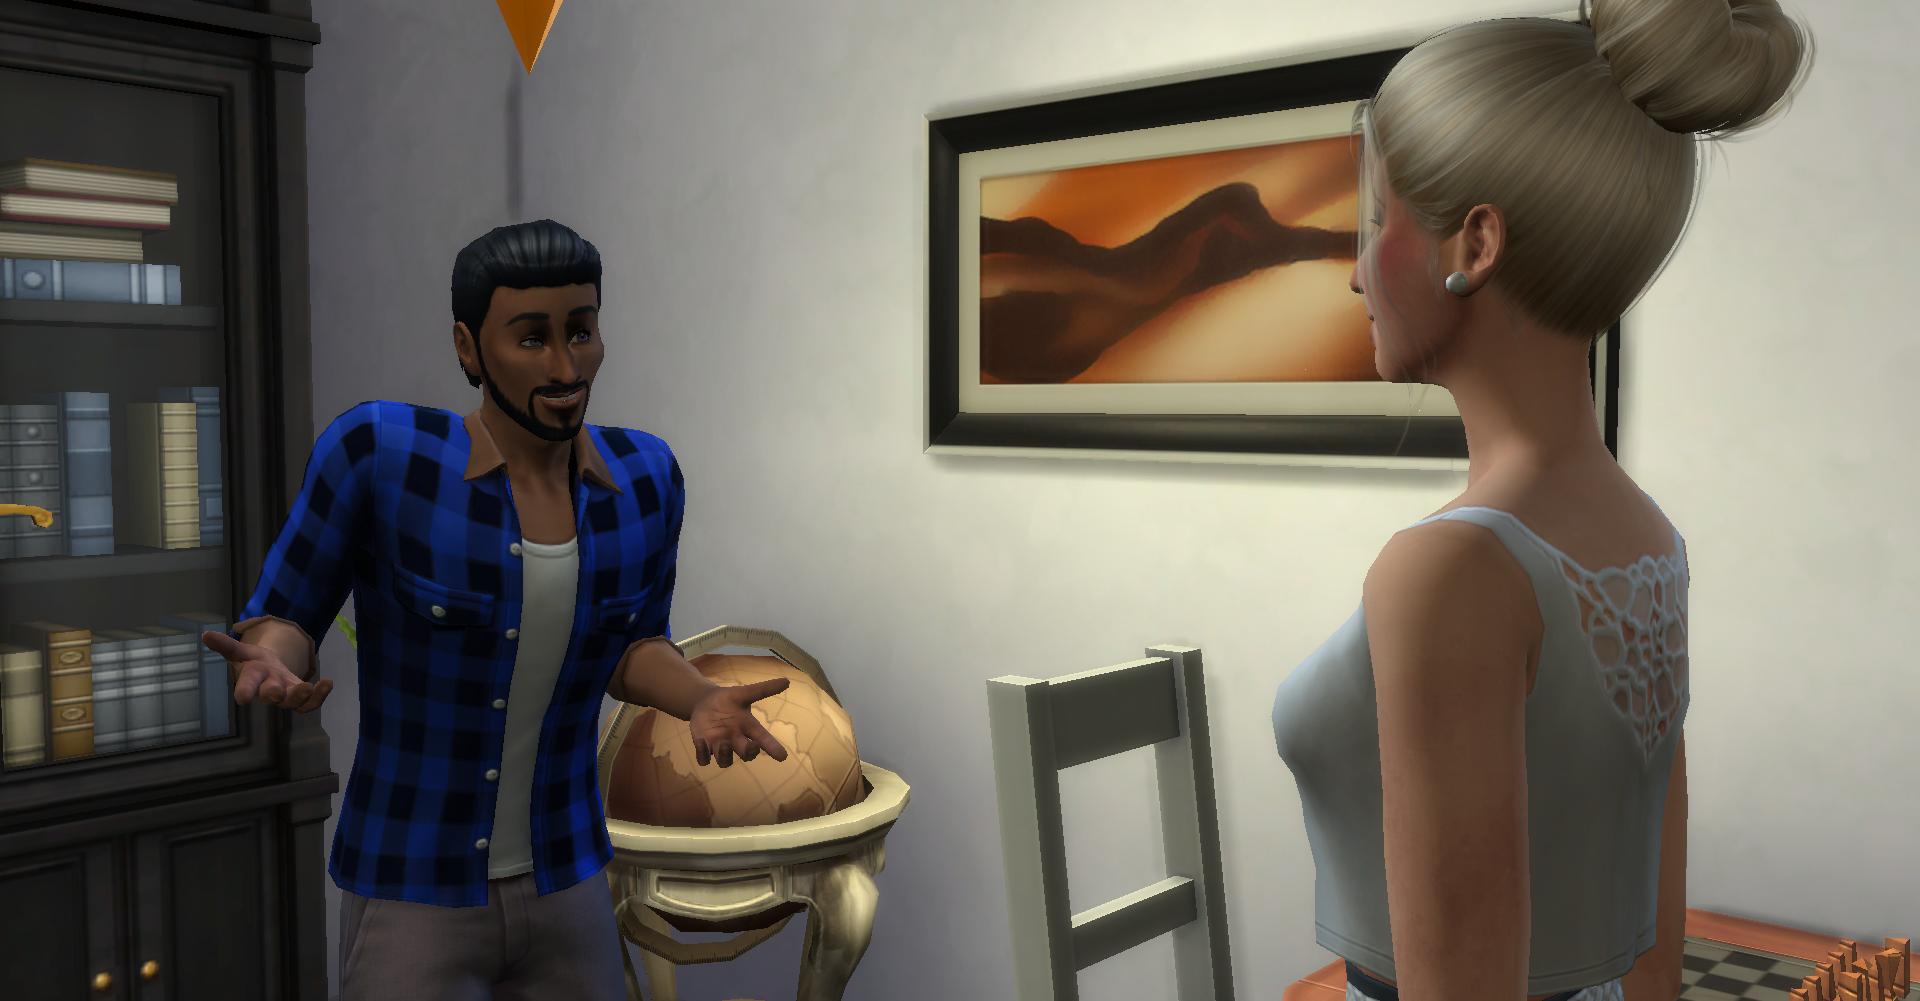 Hot Complications Sims Story Page 8 The Sims 4 General Discussion 2610